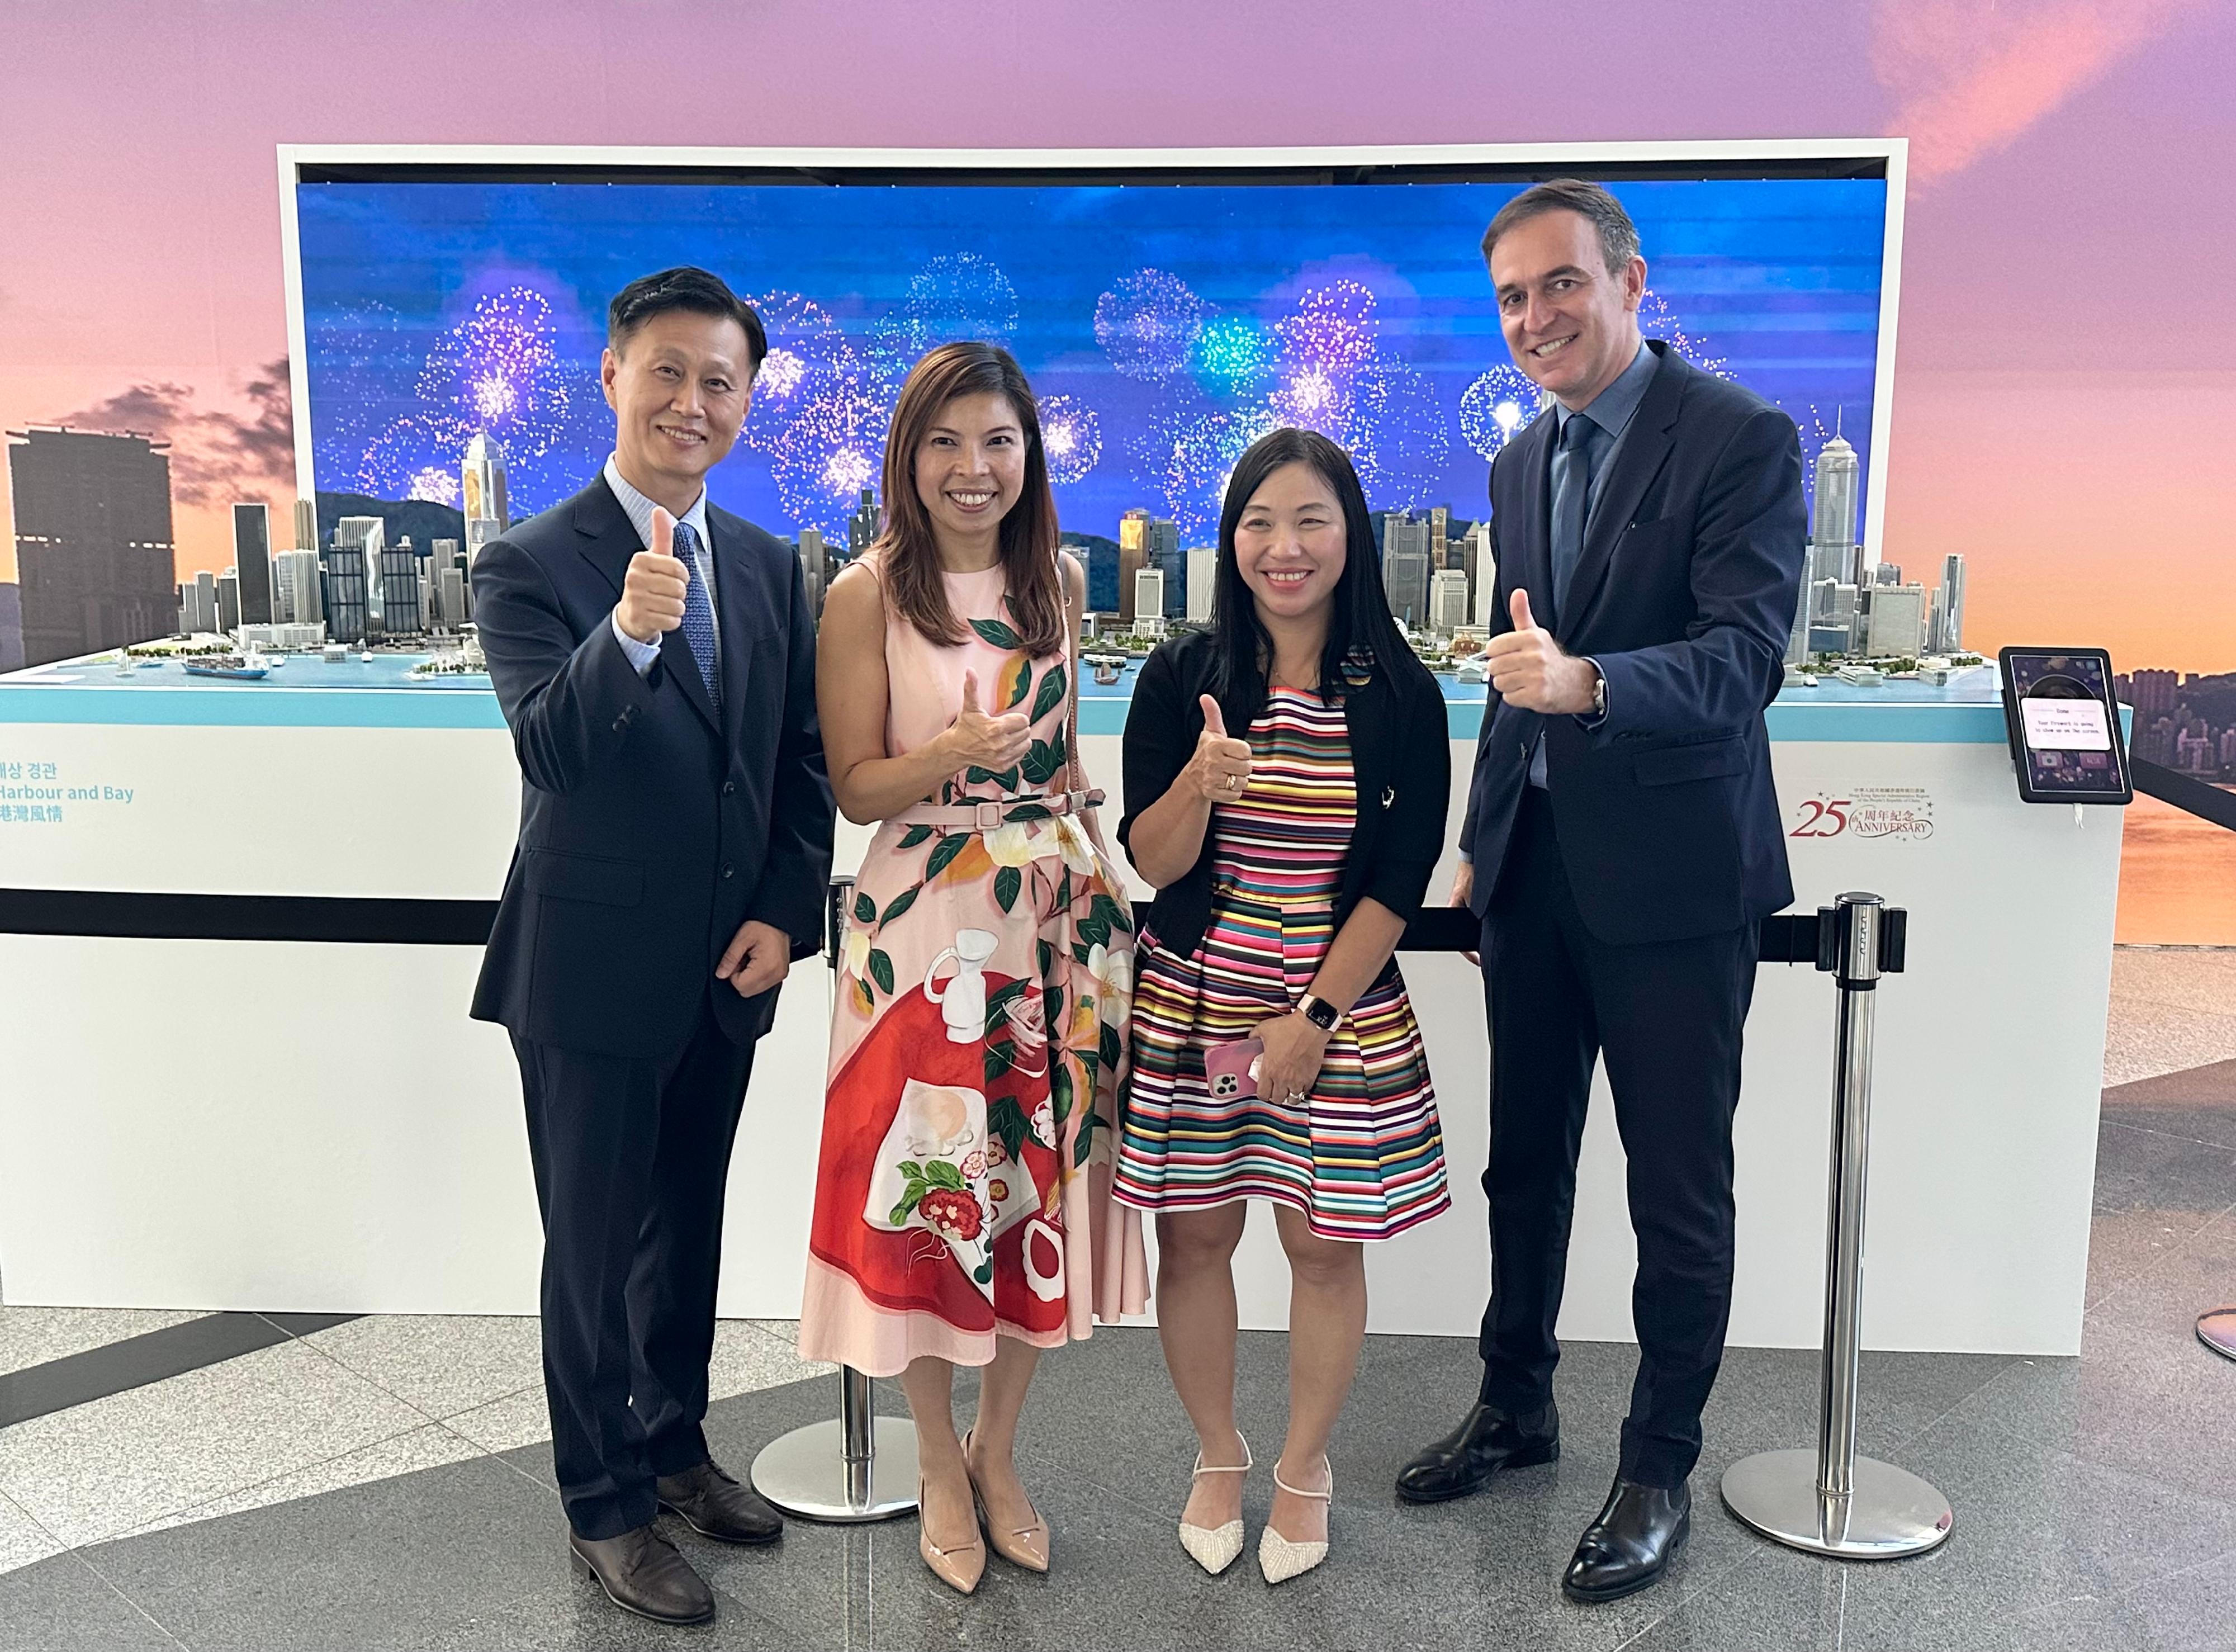 The "Hong Kong in Miniature" Exhibition @Seoul 2022, which showcases 40 miniature models that capture the uniqueness and vibrancy of Hong Kong, opened in Seoul, Korea, today (September 24). The Acting Principal Hong Kong Economic and Trade Representative (Tokyo), Miss Winsome Au (second left) is pictured with the Regional Director of Korea of the Hong Kong Tourism Board, Mr Kim Yoon-ho (first left); the Country Manager (Korea) of Cathay Pacific Airways, Mr Nicolas Masse  (first right); and the Chairman of the Joyful Miniature Association, Ms Carmen Poon (second right) in front of the Victoria Harbour miniature model.